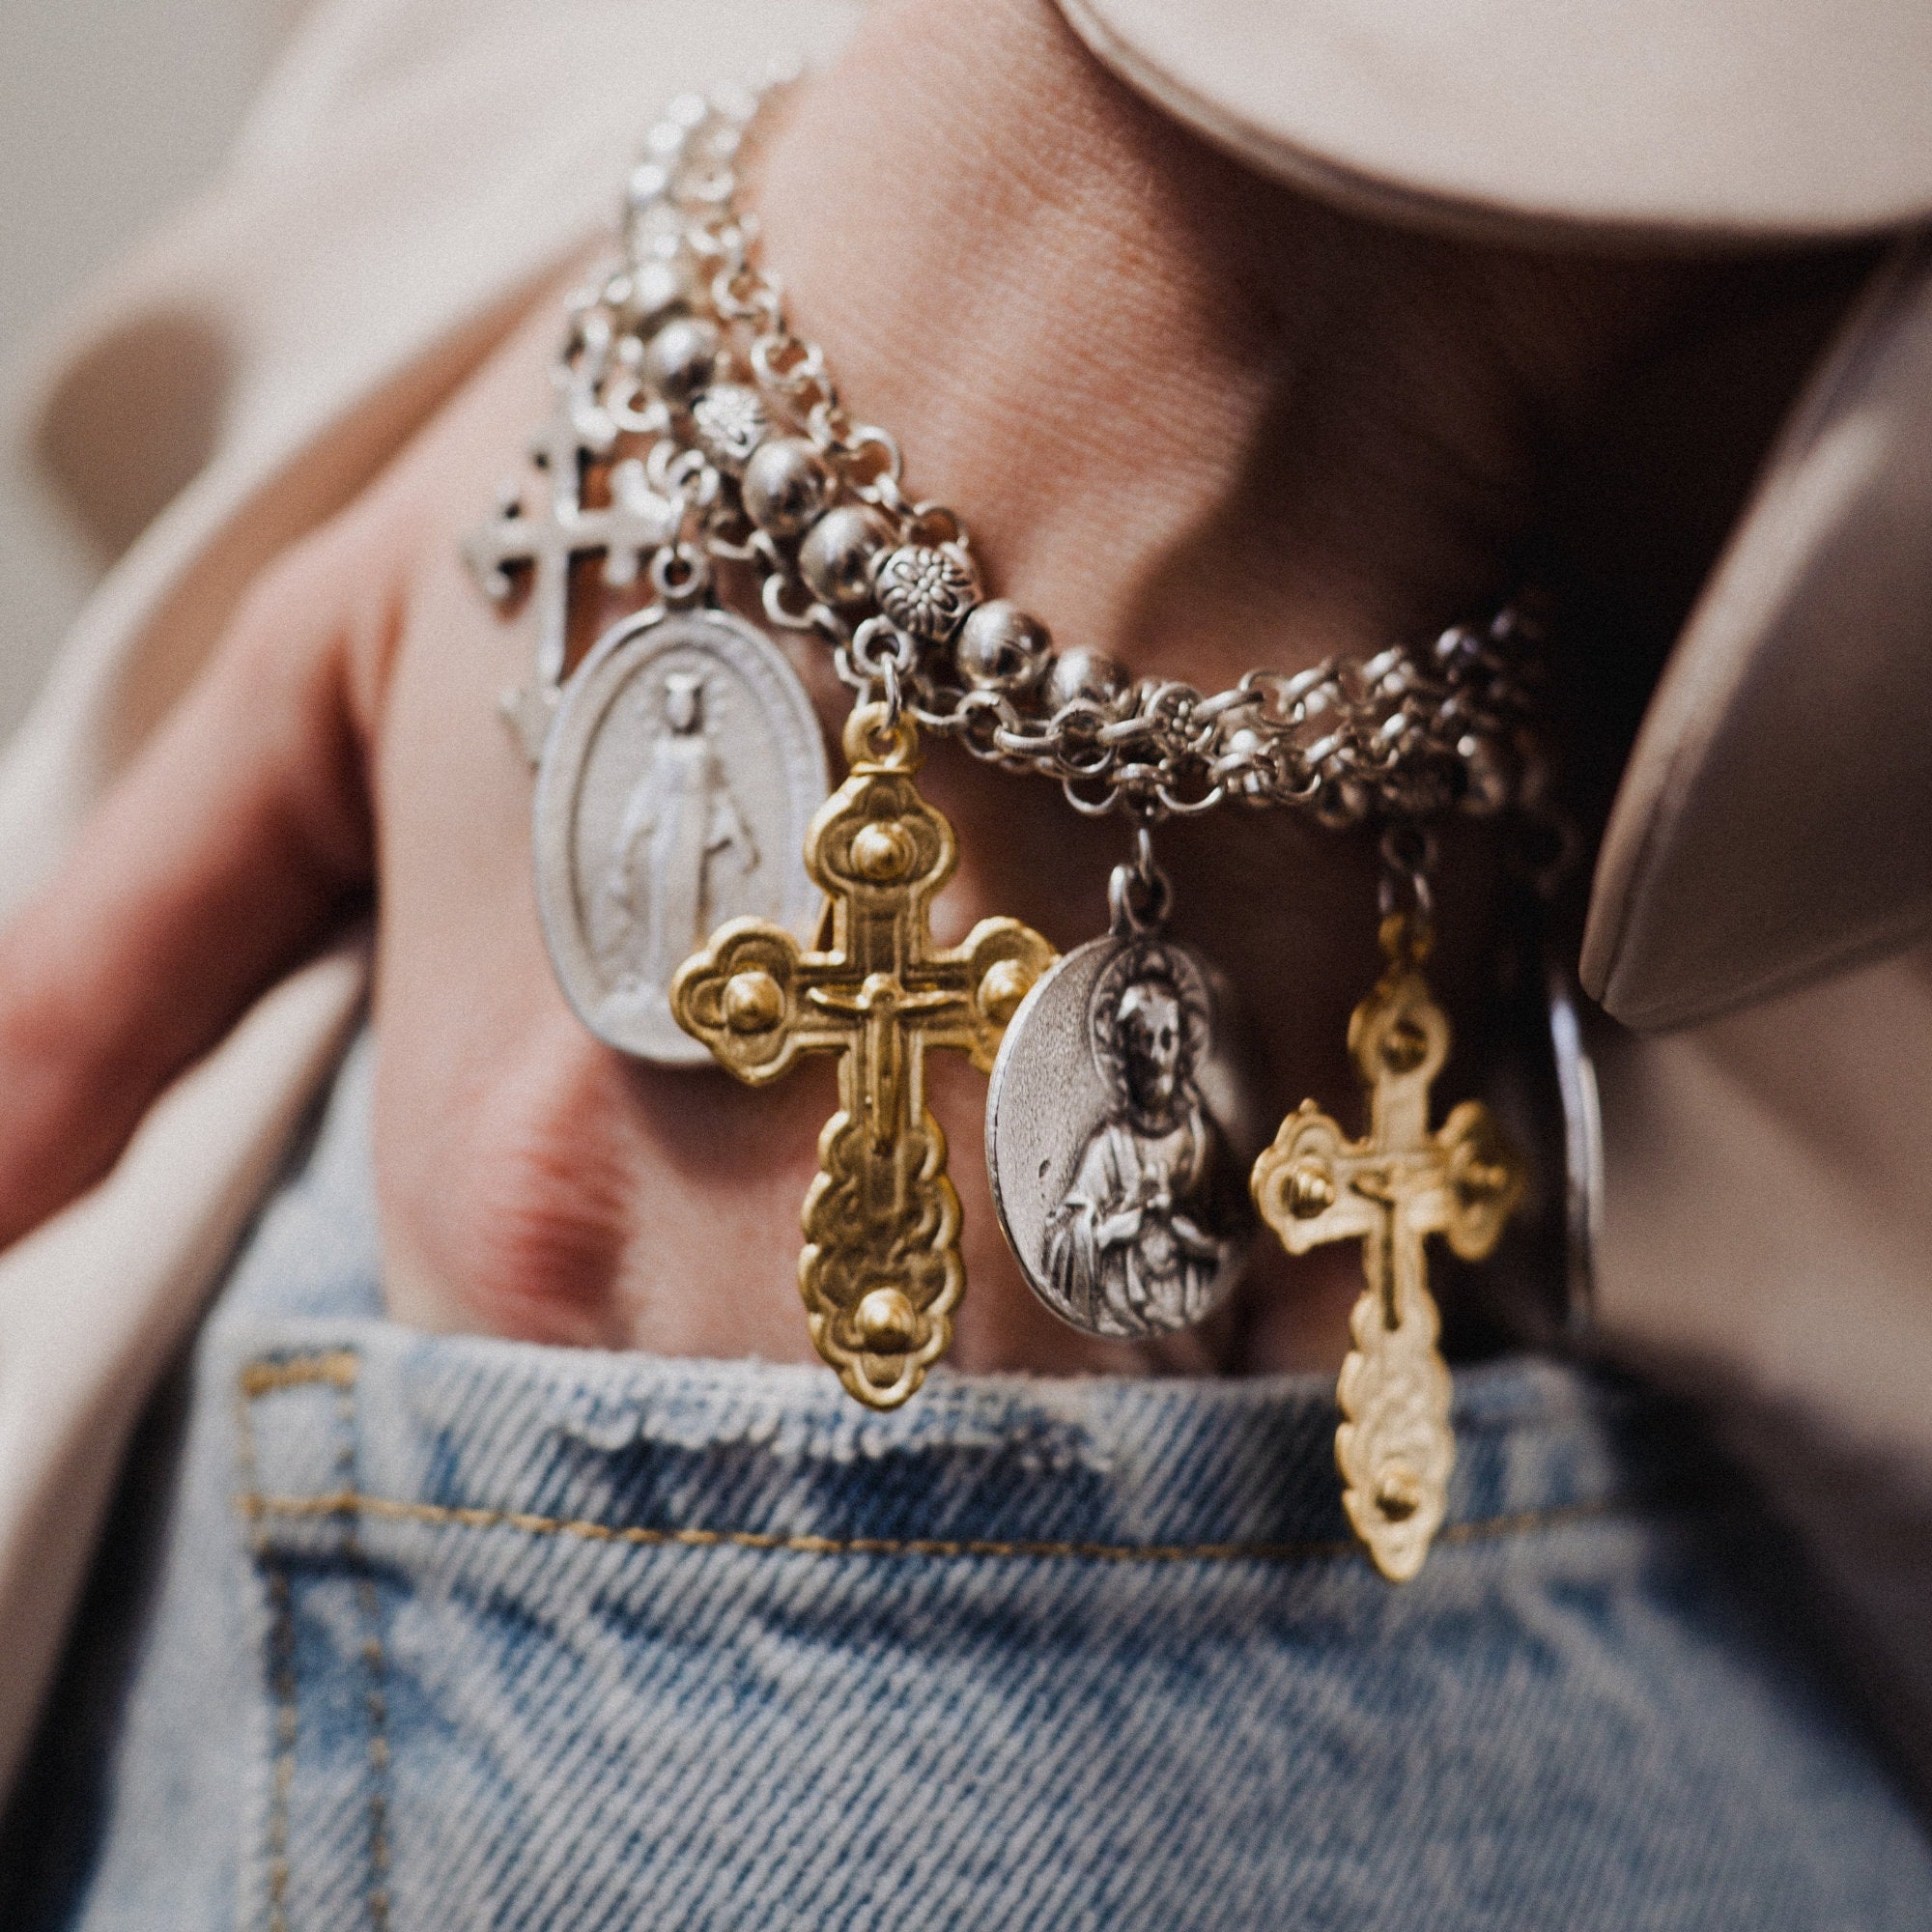 Virgin Mary Necklace - Christian Jewelry for Women - Miraculous Medals Catholic - Virgin Mary Charms - Catholic Jewelry - Virgin Mary Pendant 